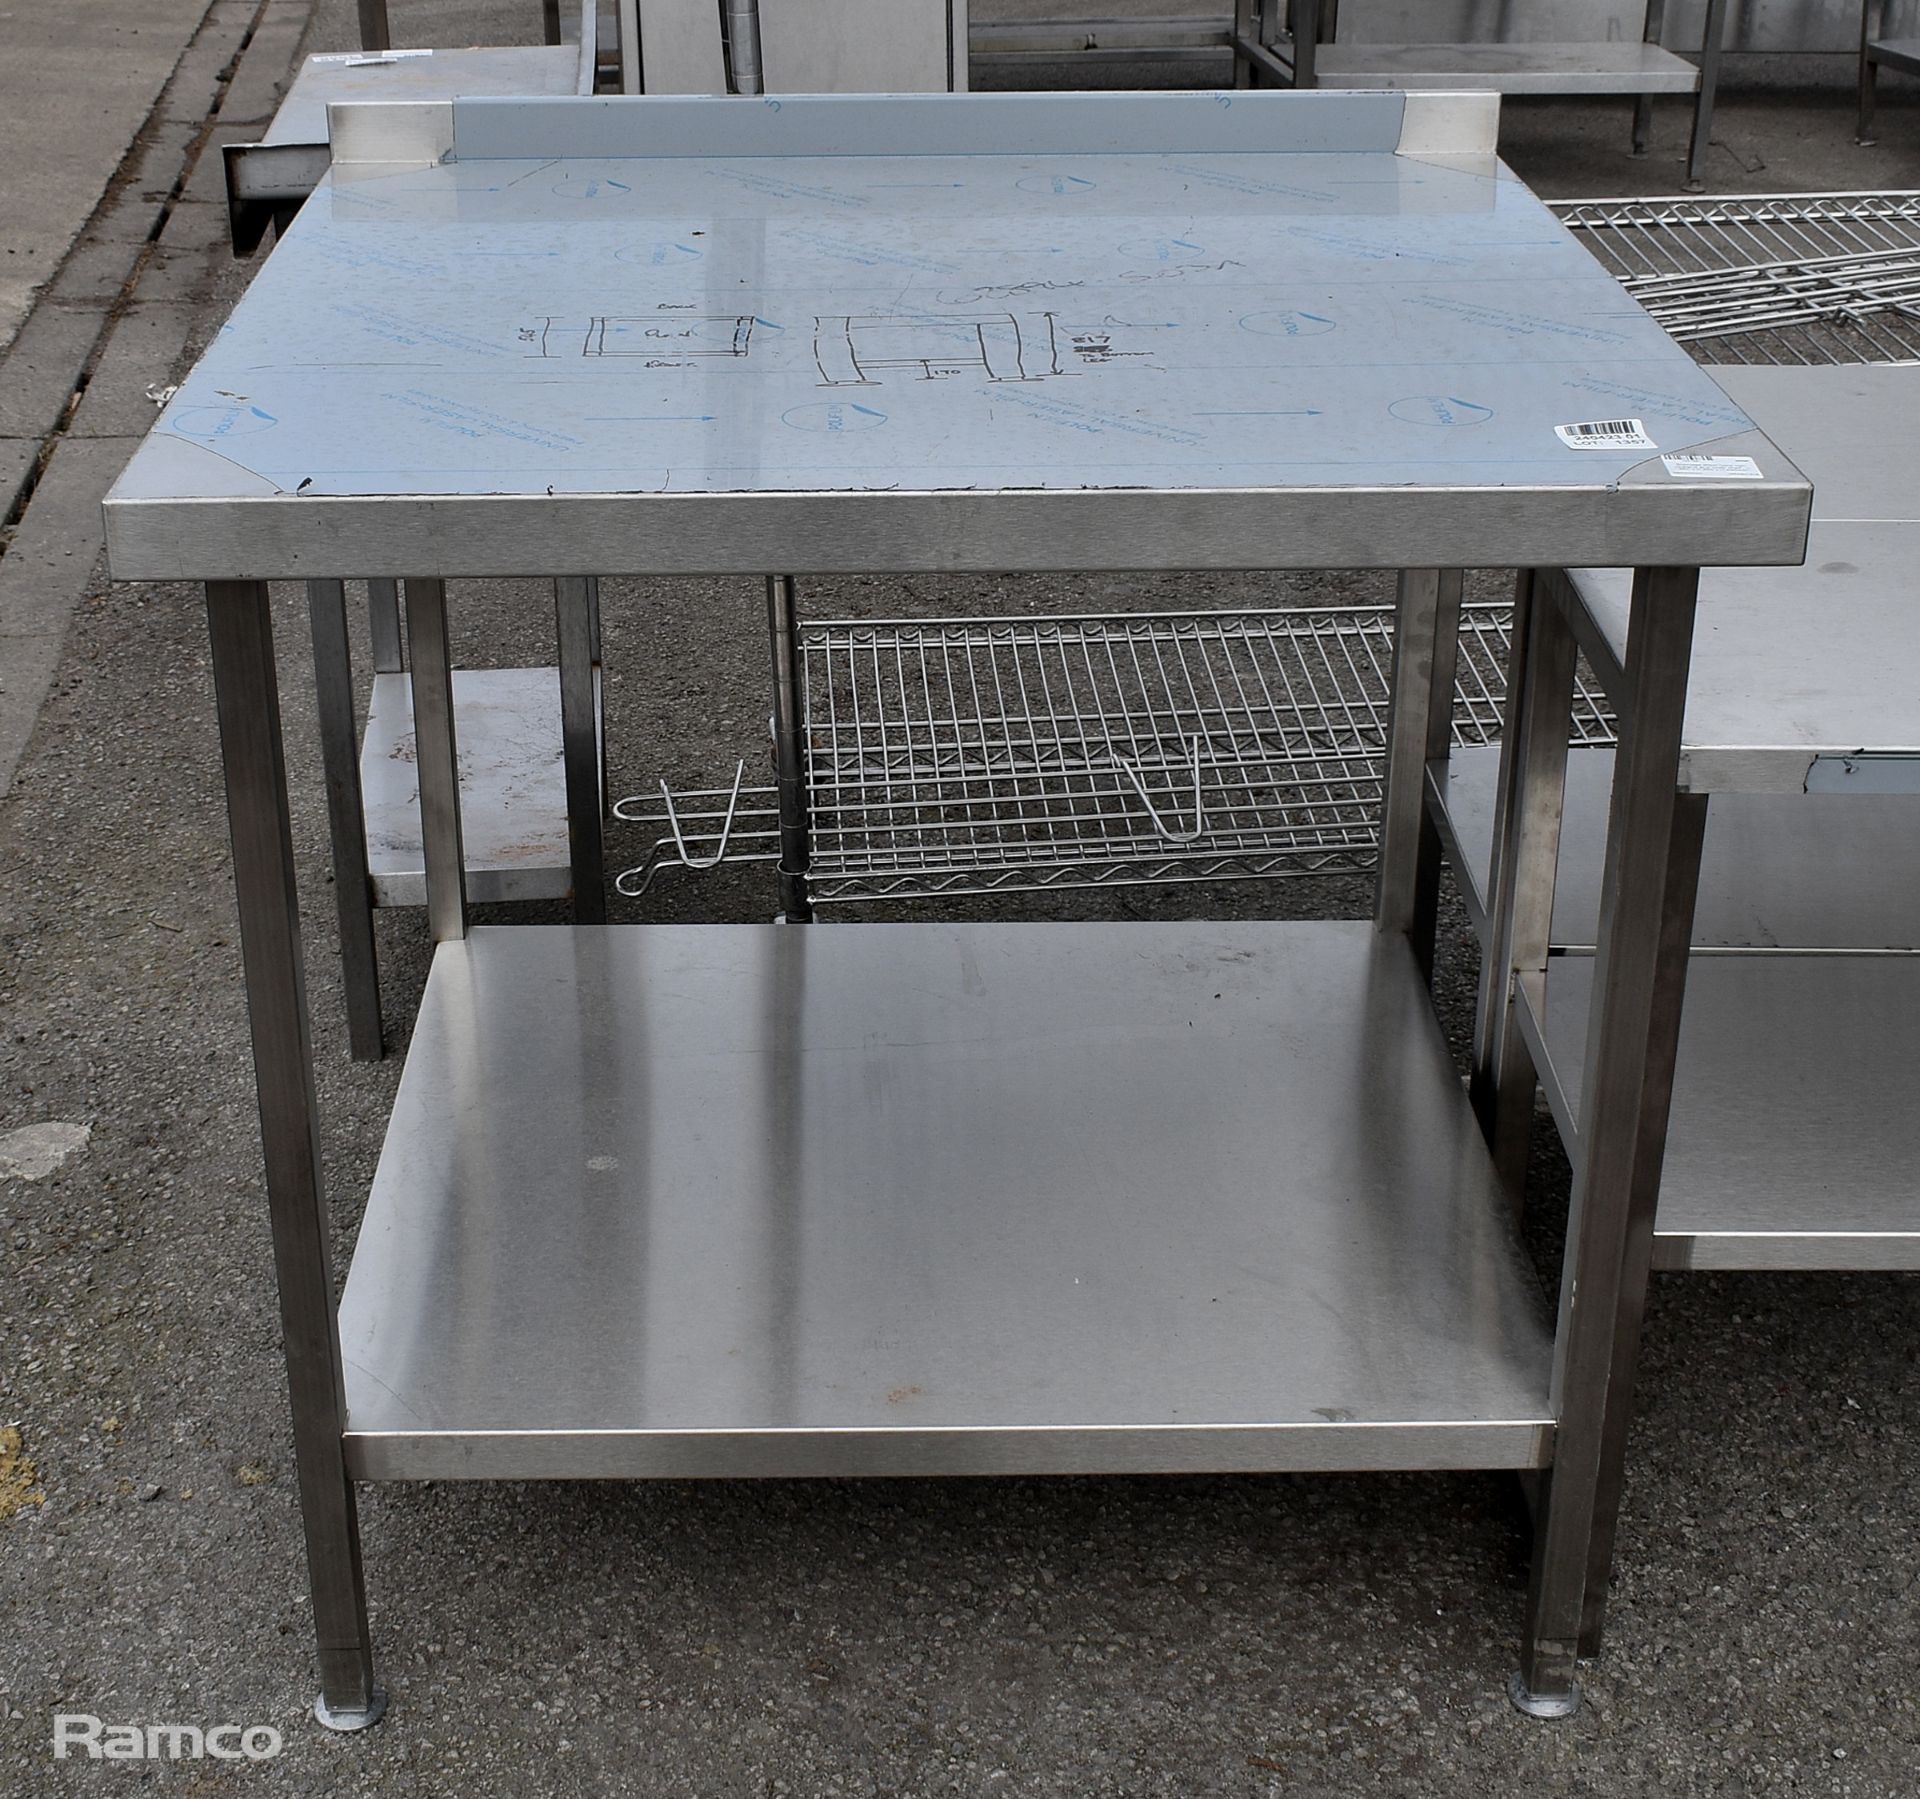 Stainless Steel table with upstand and lower shelf - L 950 x D 850 x H 940mm